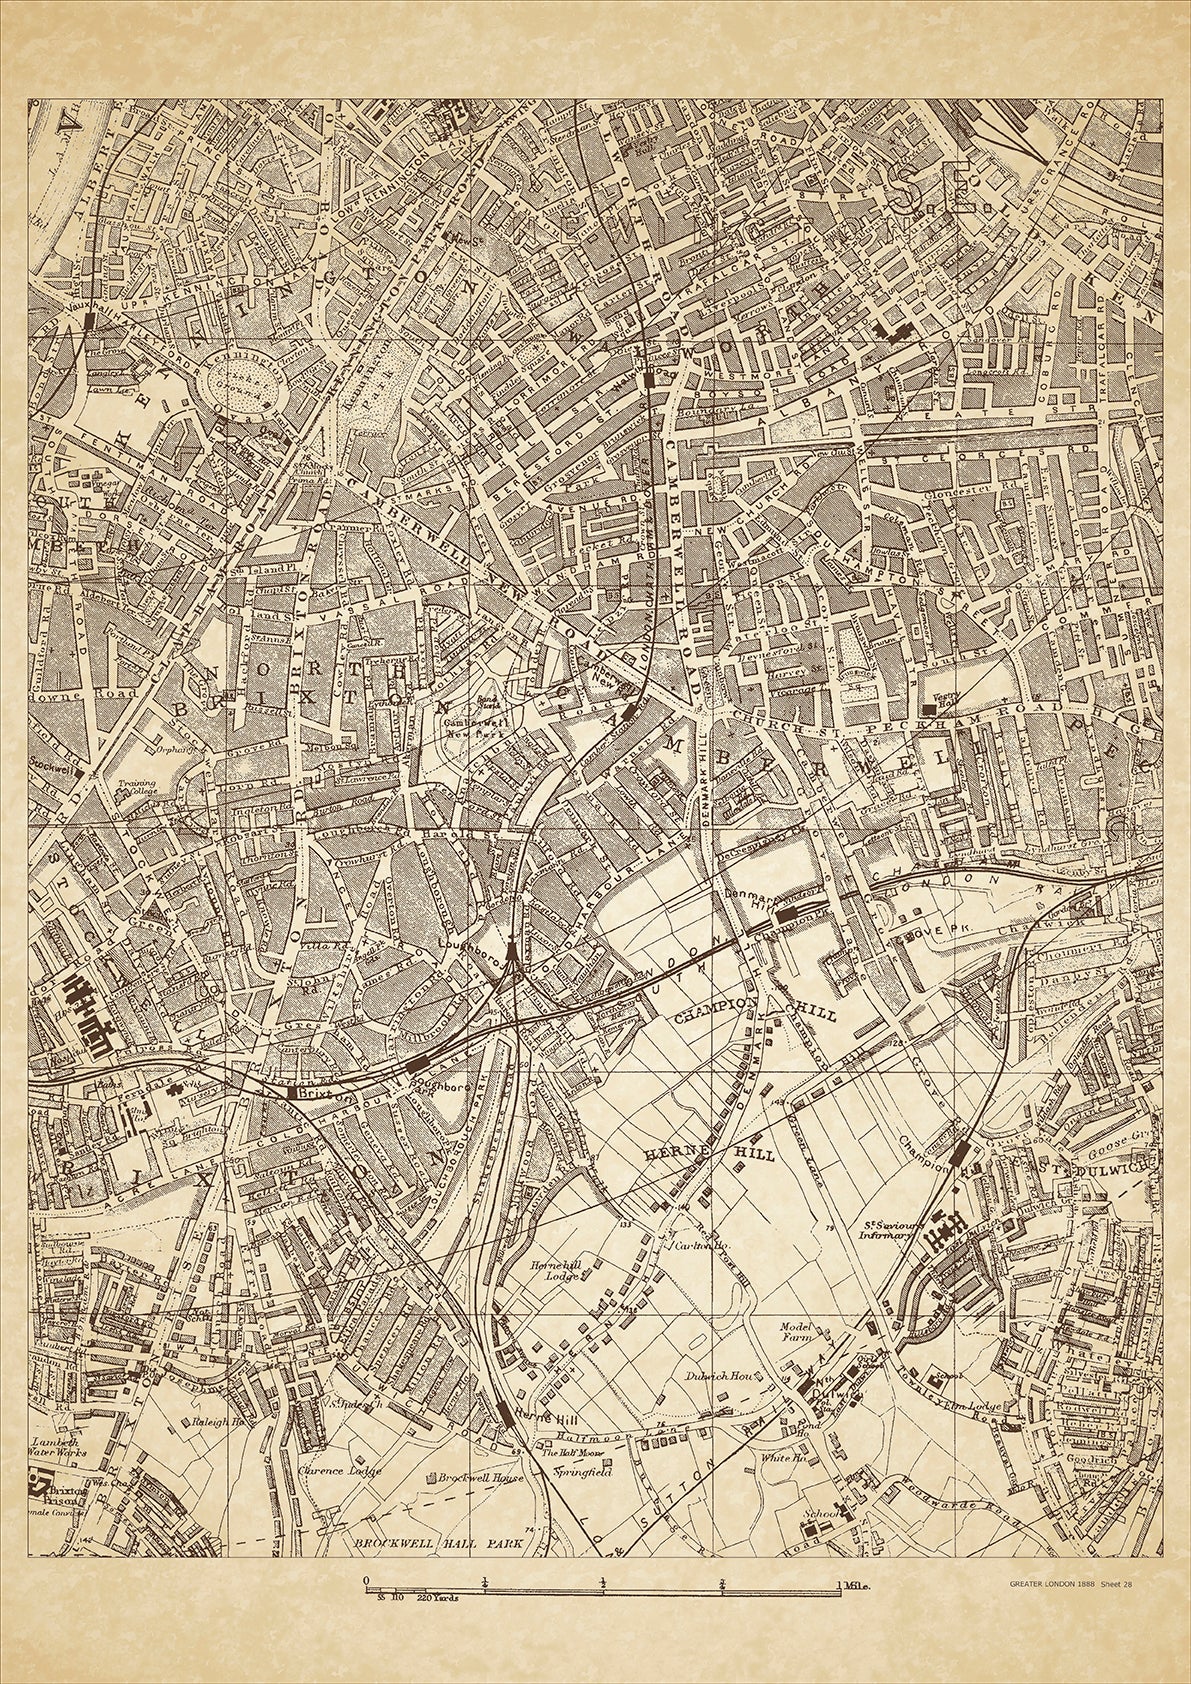 Greater London in 1888 Series - showing Camberwell, Brixton, Walworth, Kennington, North Brixton, Champion Hill, Herne Hill, East Dulwich (west) - sheet 28